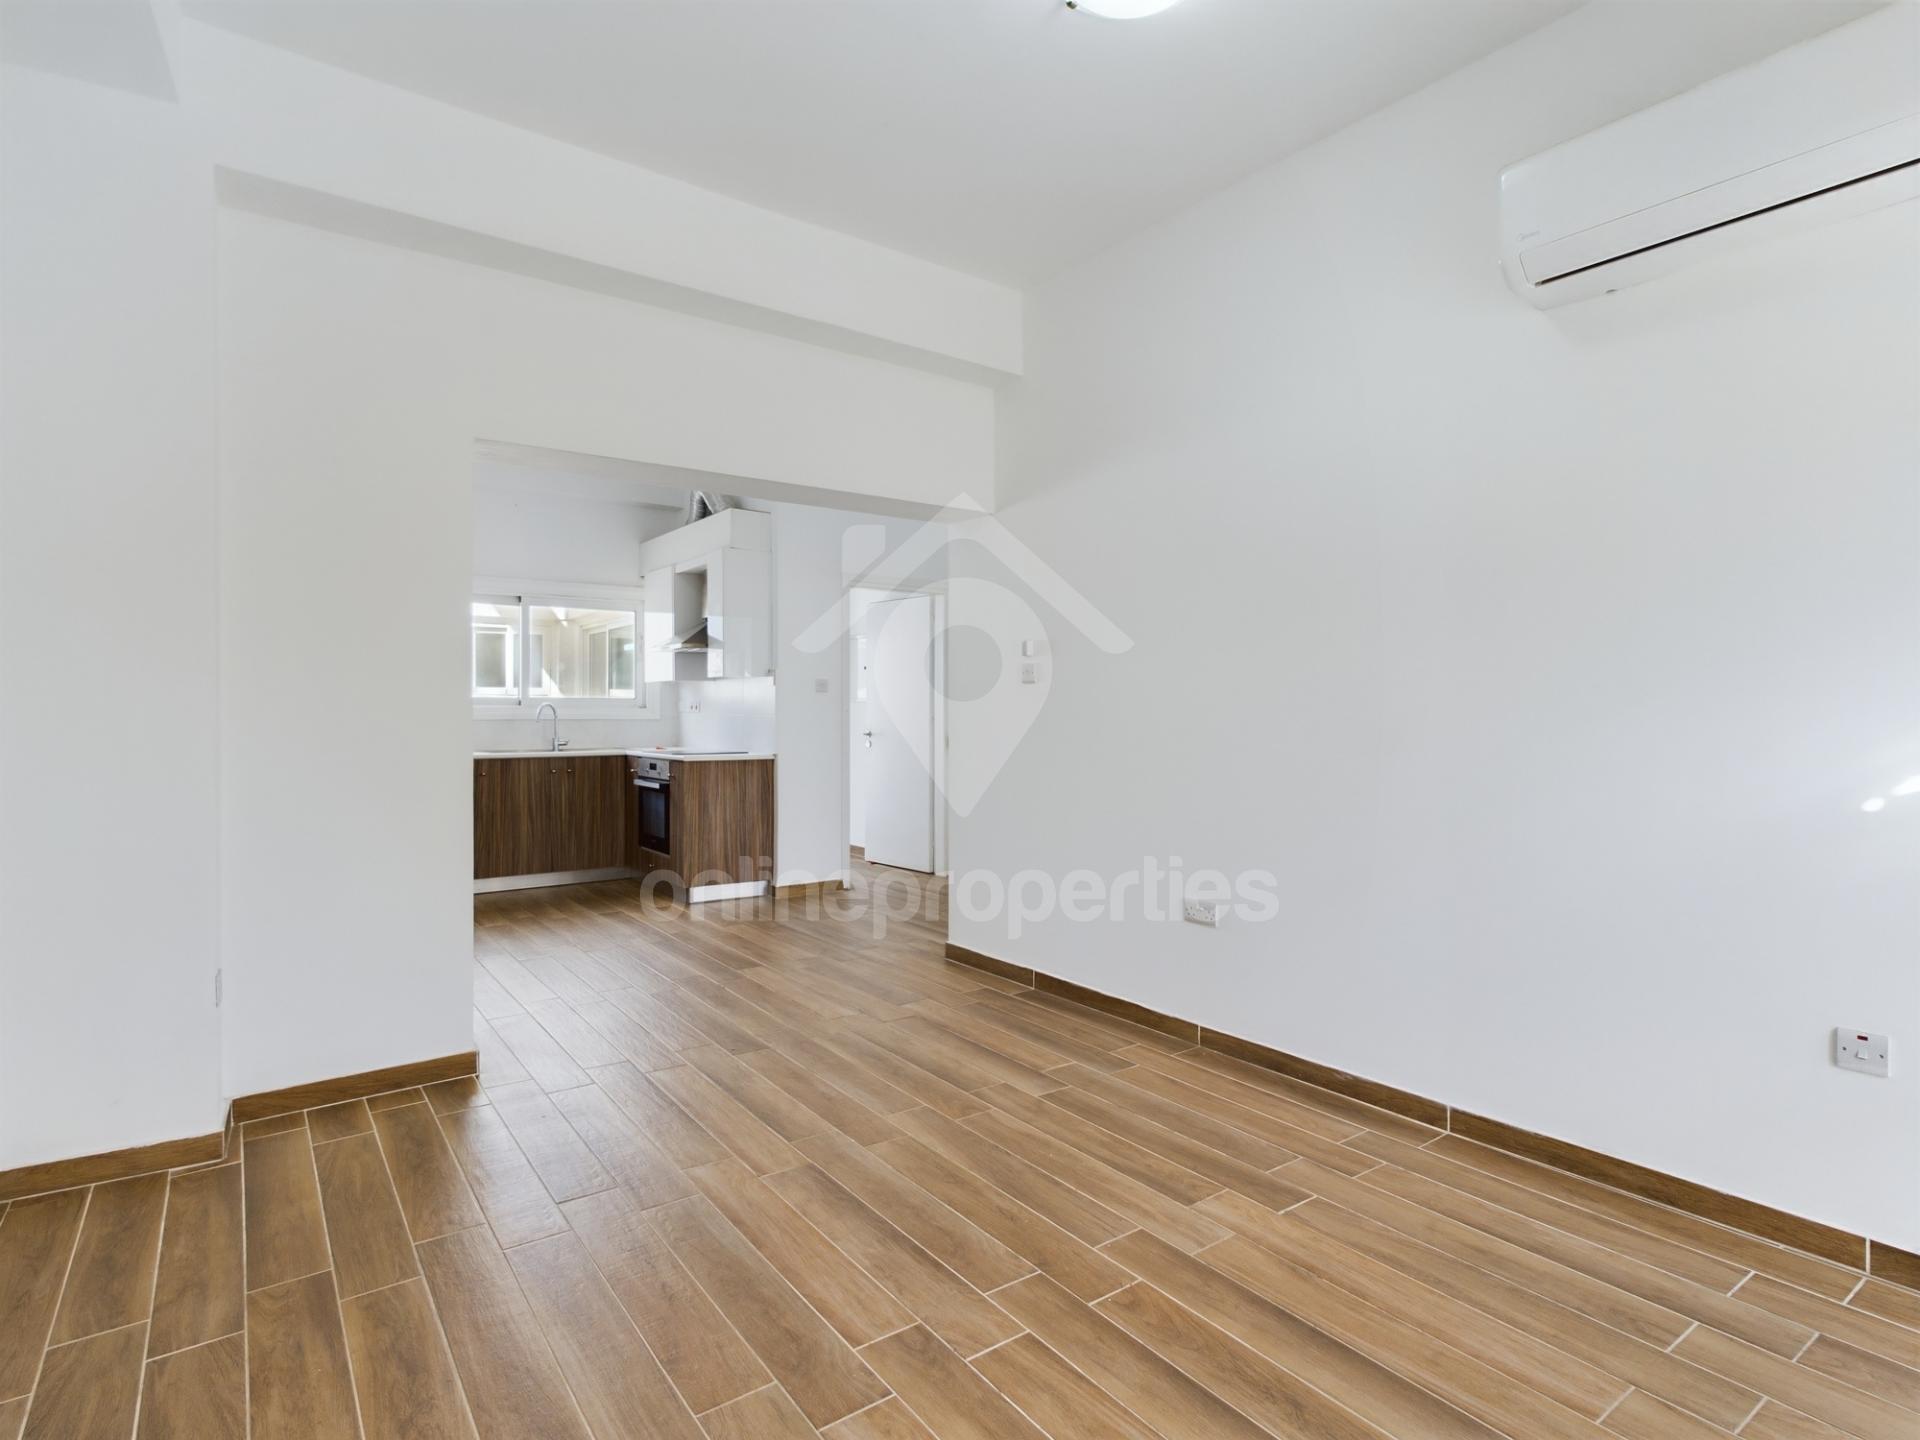 Spacious apartment in the heart of the city 